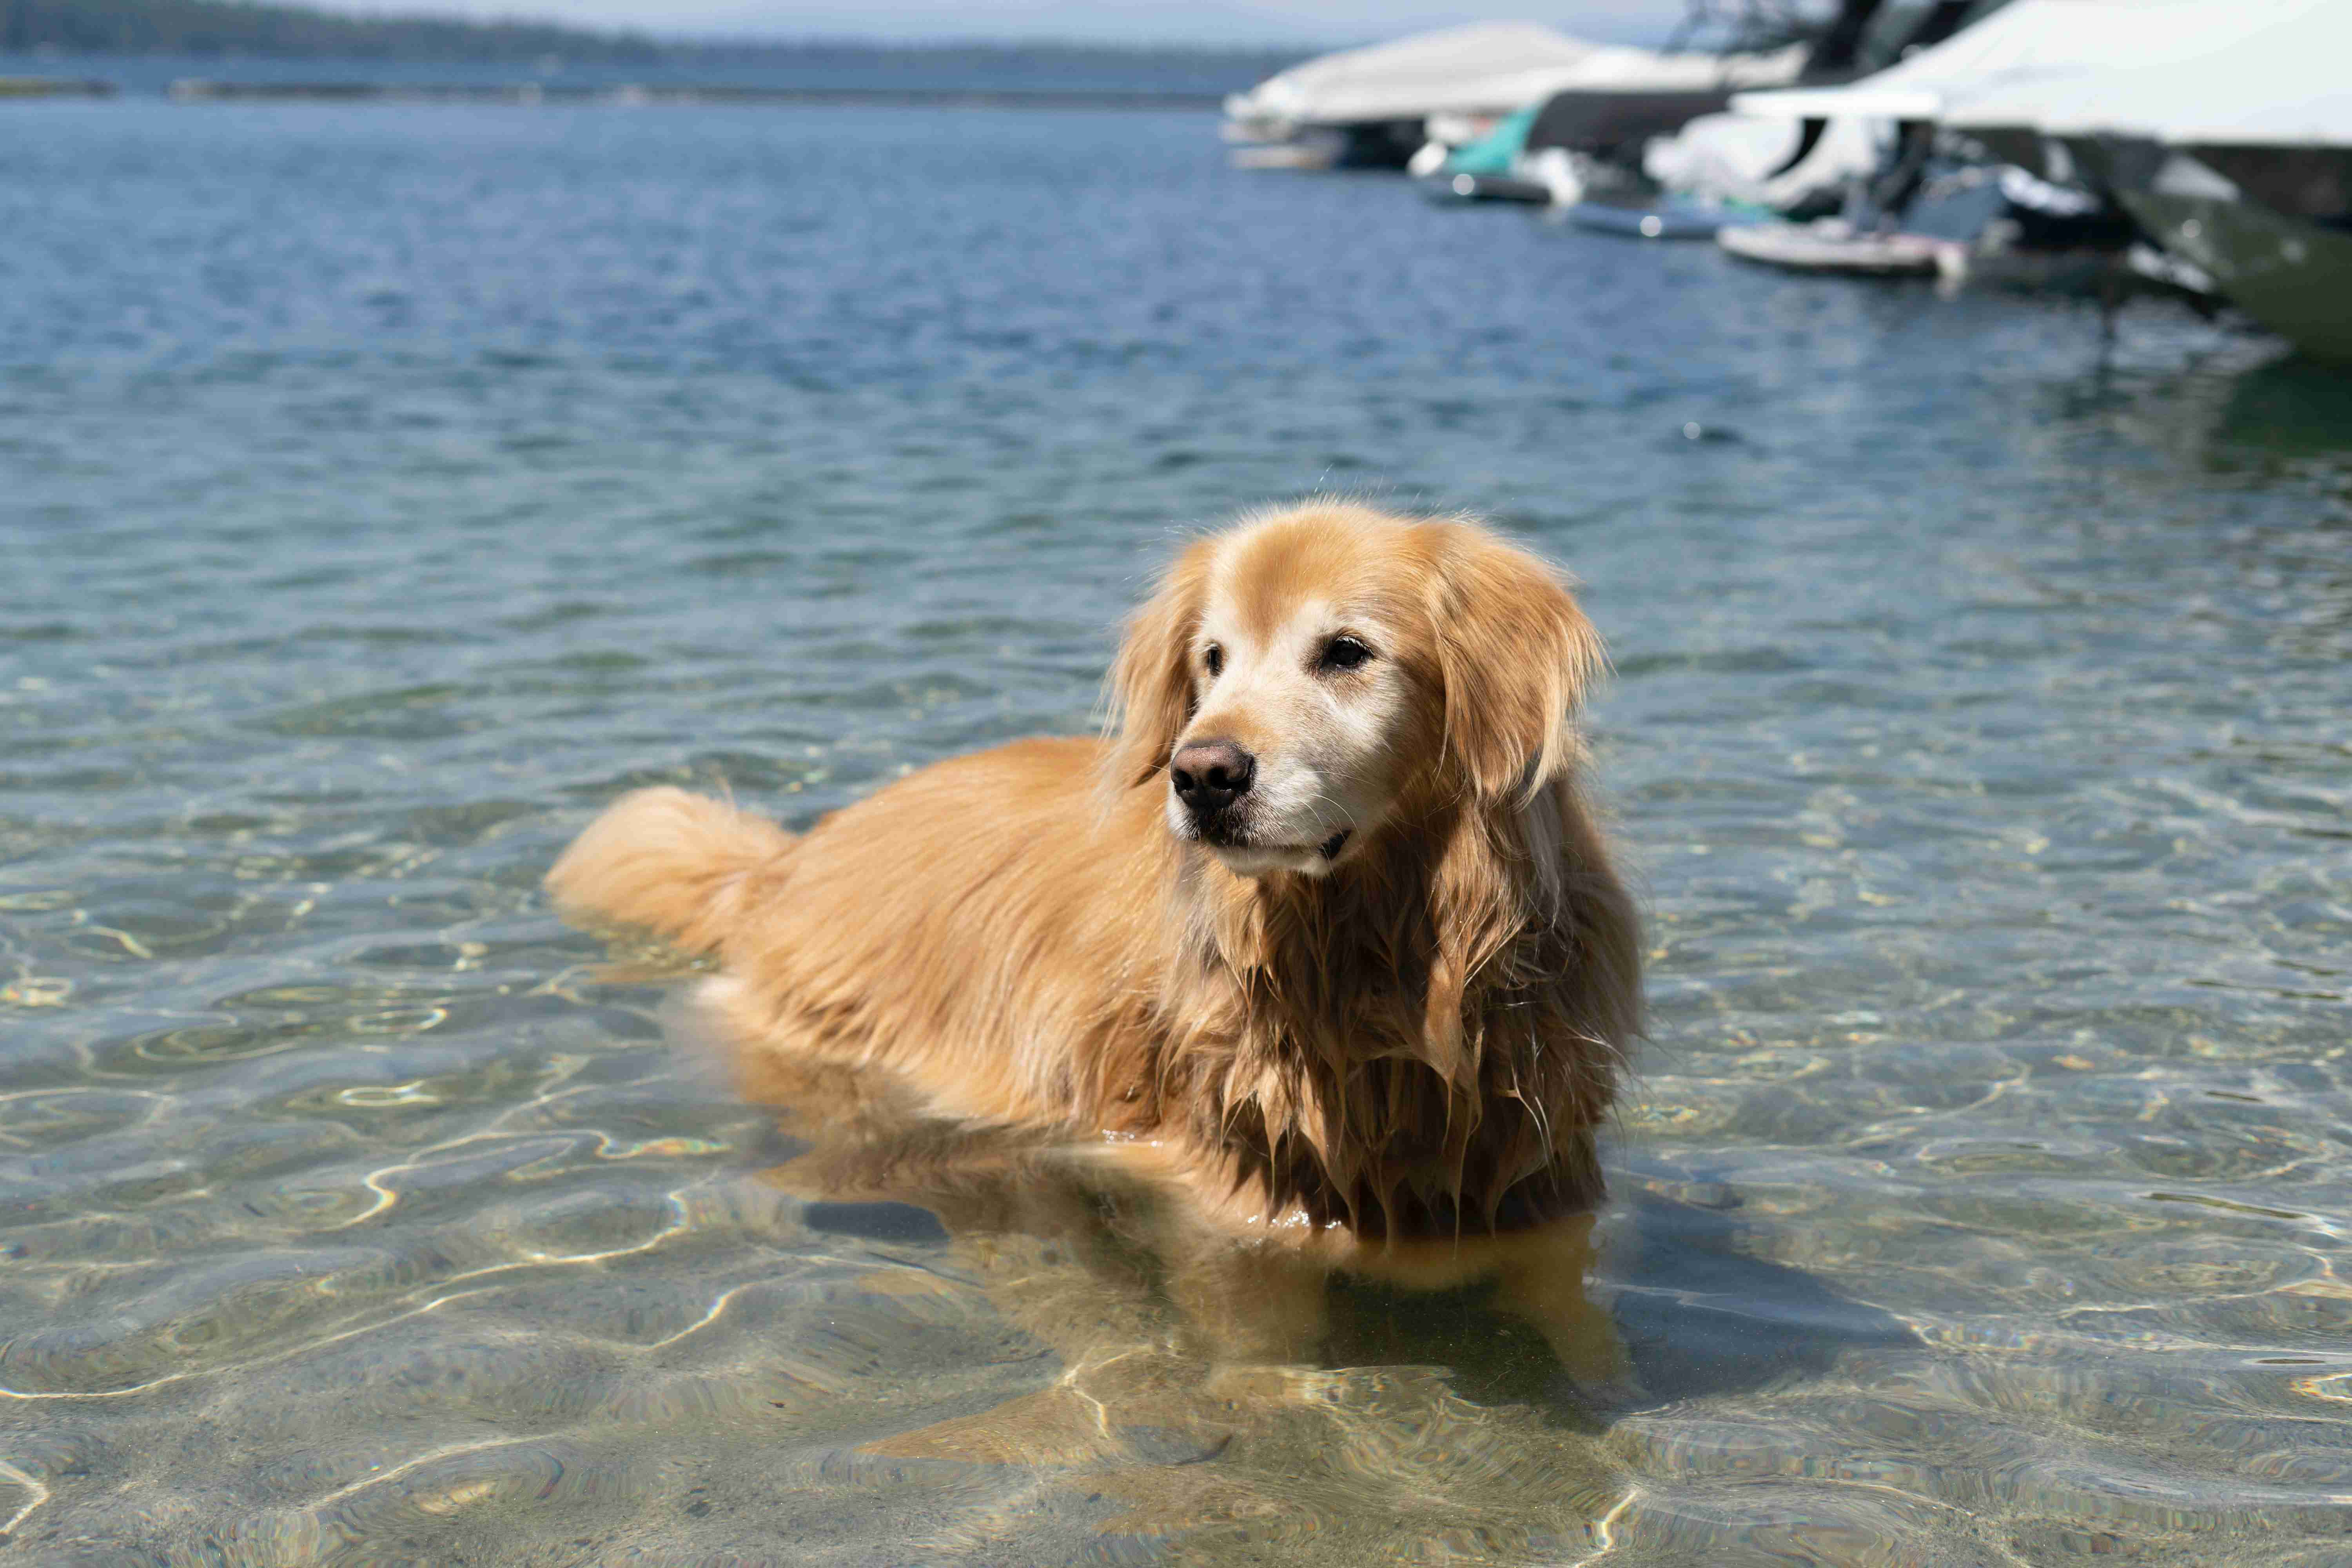 Can Golden Retrievers be trained to be reliable with recall commands?